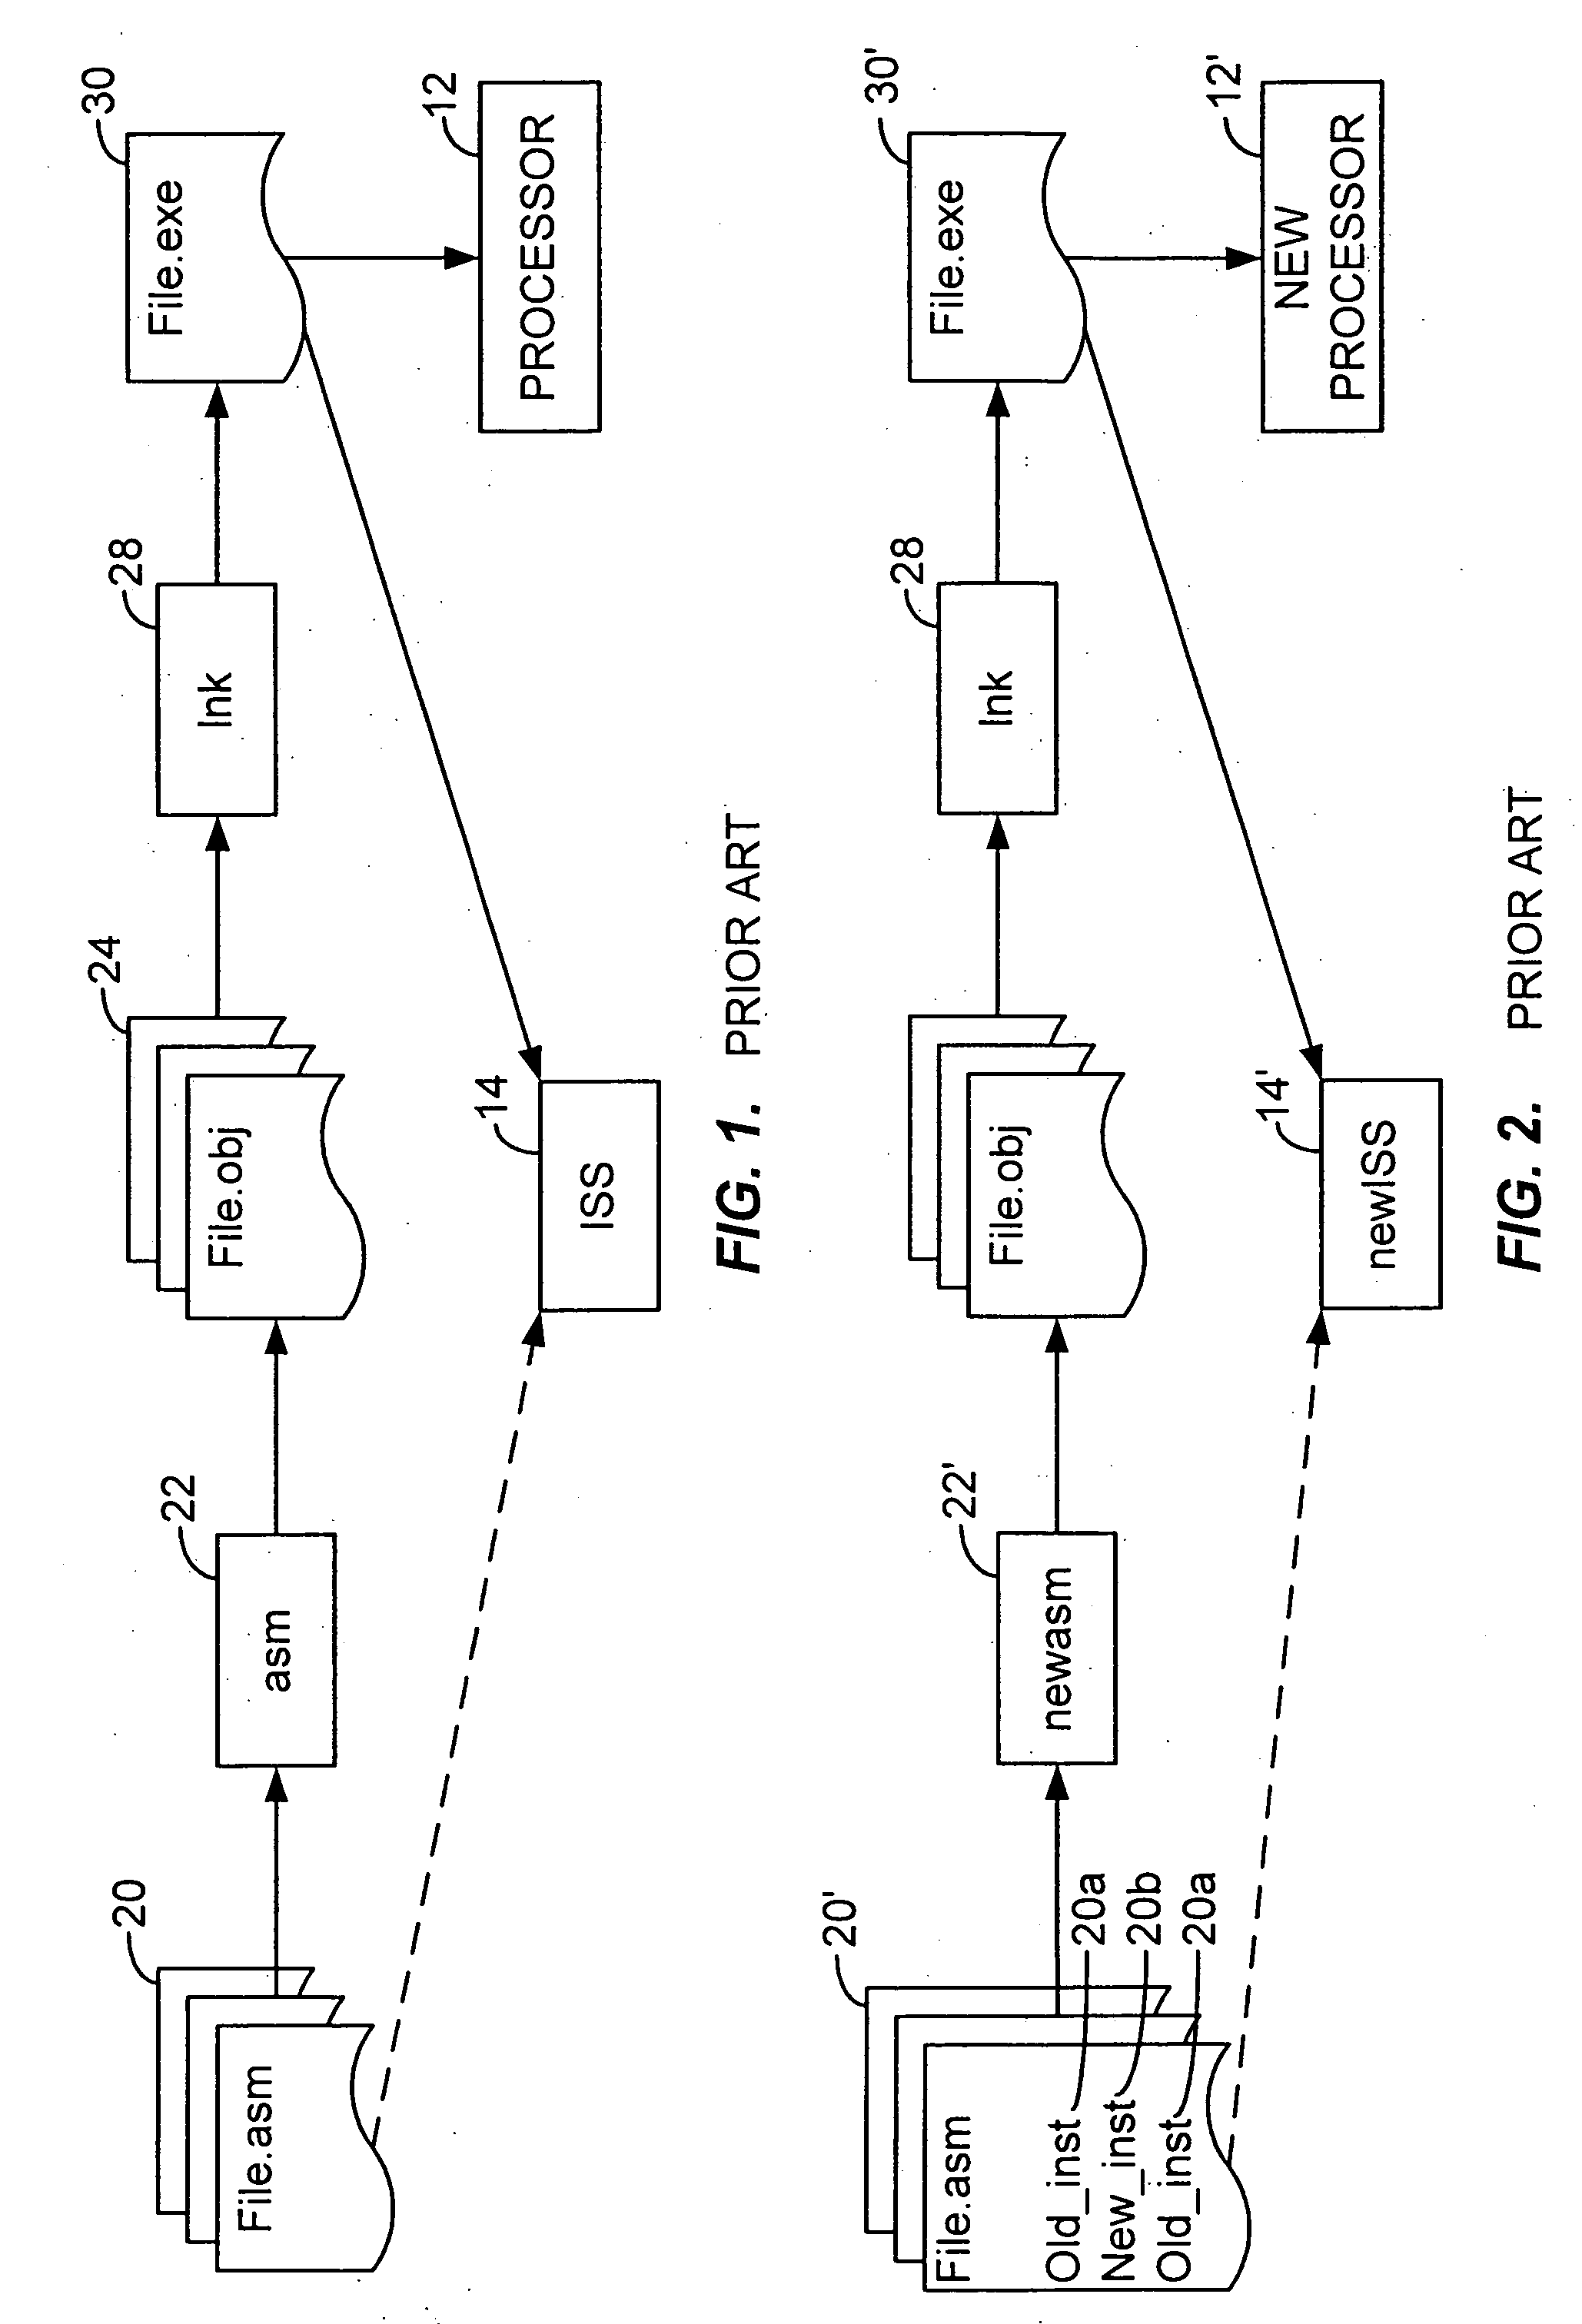 Assembly language code compilation for an instruction-set architecture containing new instructions using the prior assembler